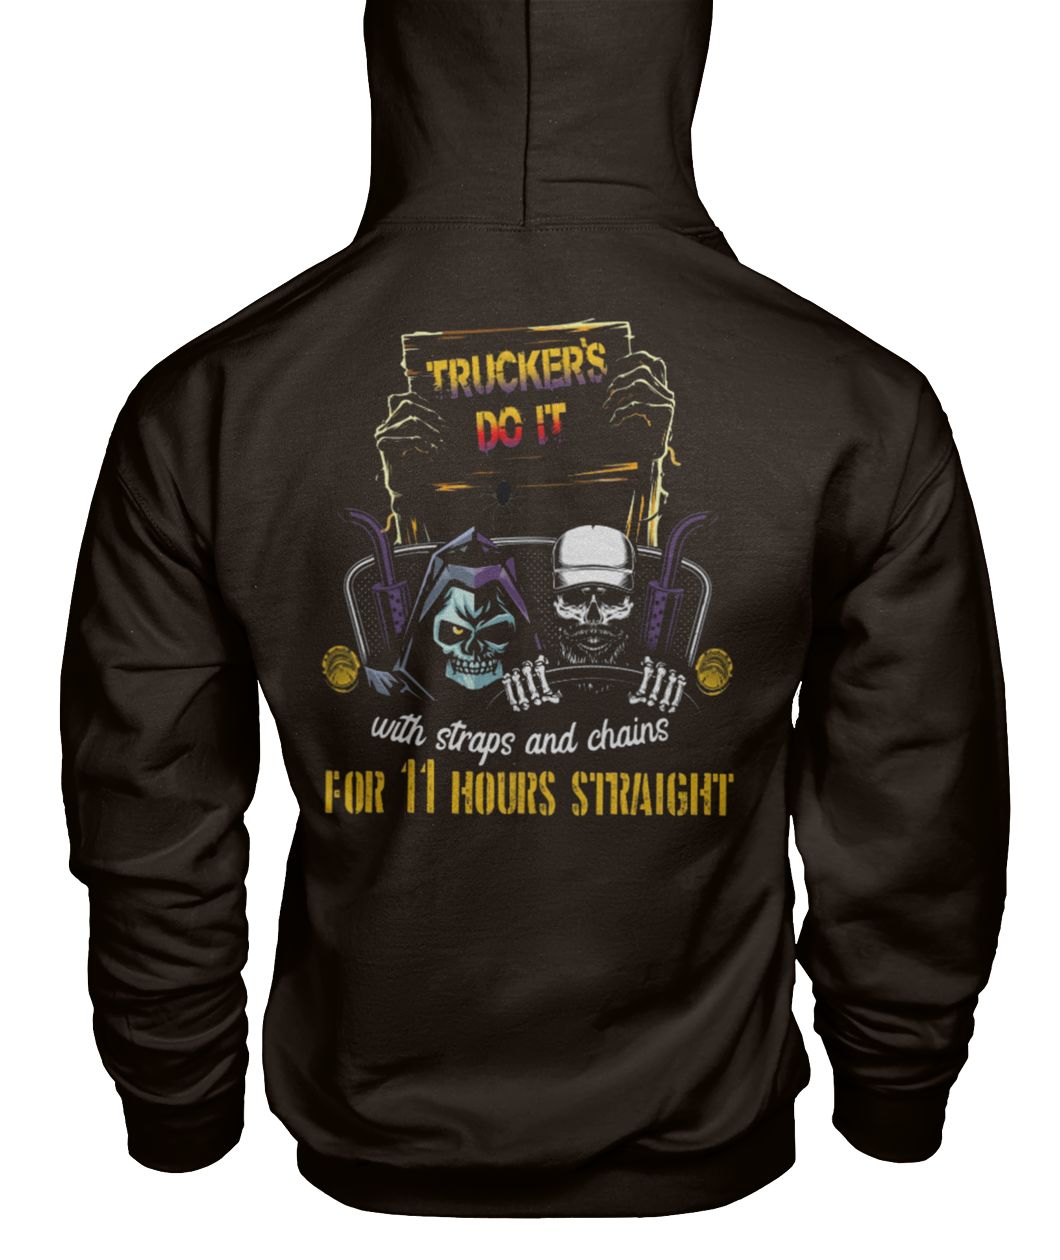 Trucker's do it with straps and chains for 11 hours straight skeleton gildan hoodie